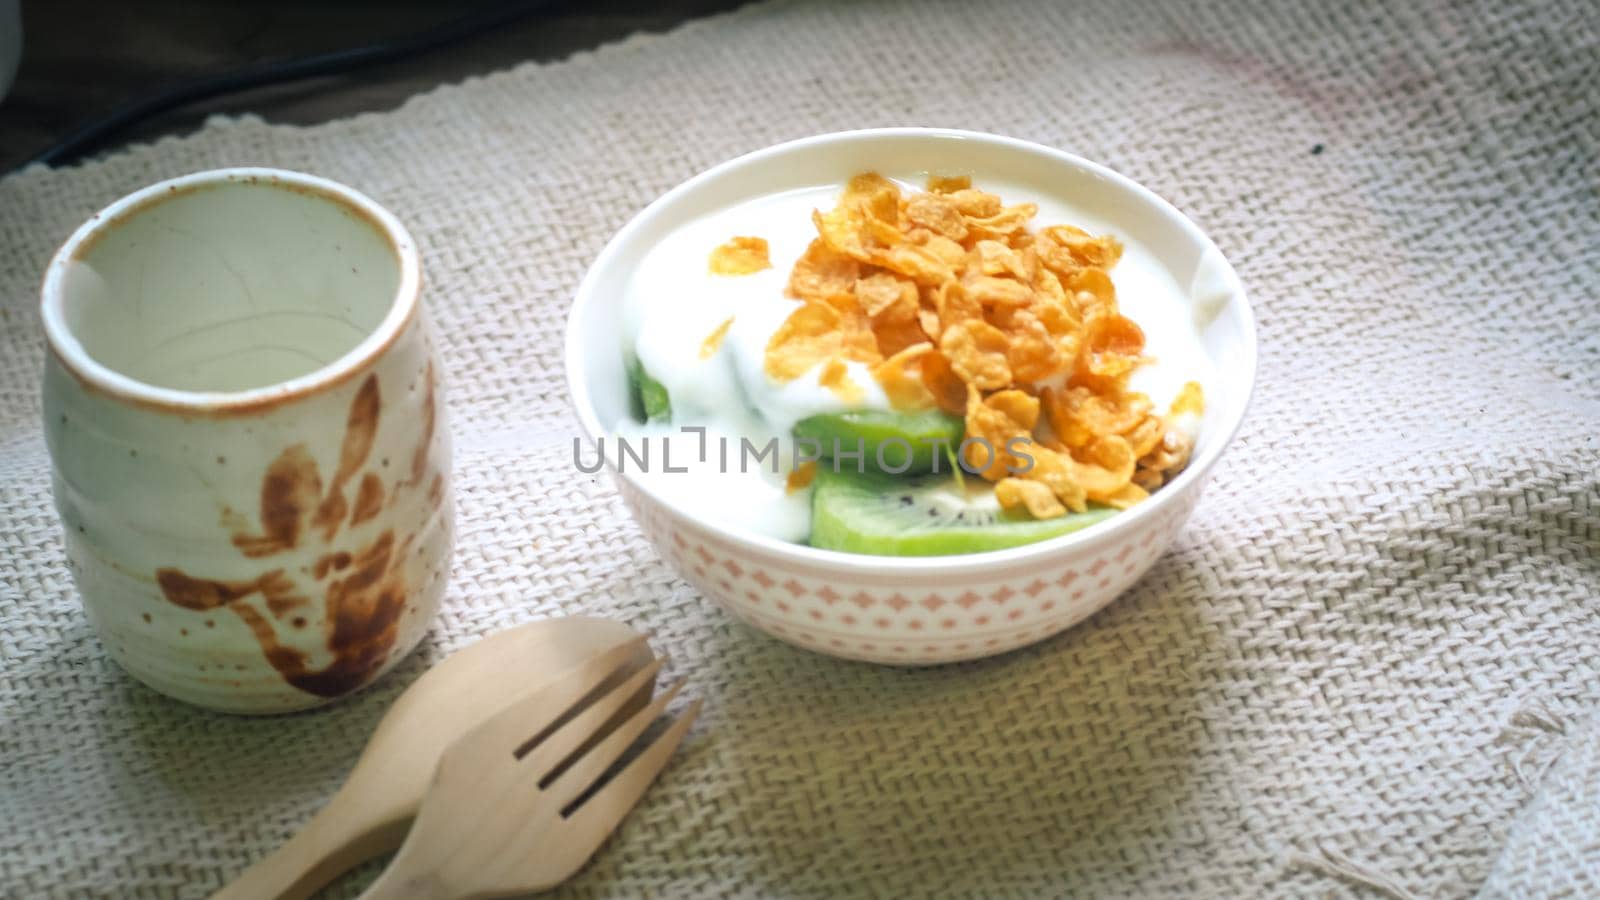 Corn flakes, cereal and milk splash in bowl . Natural homemade plain organic yogurt in wood bowl on wood texture background